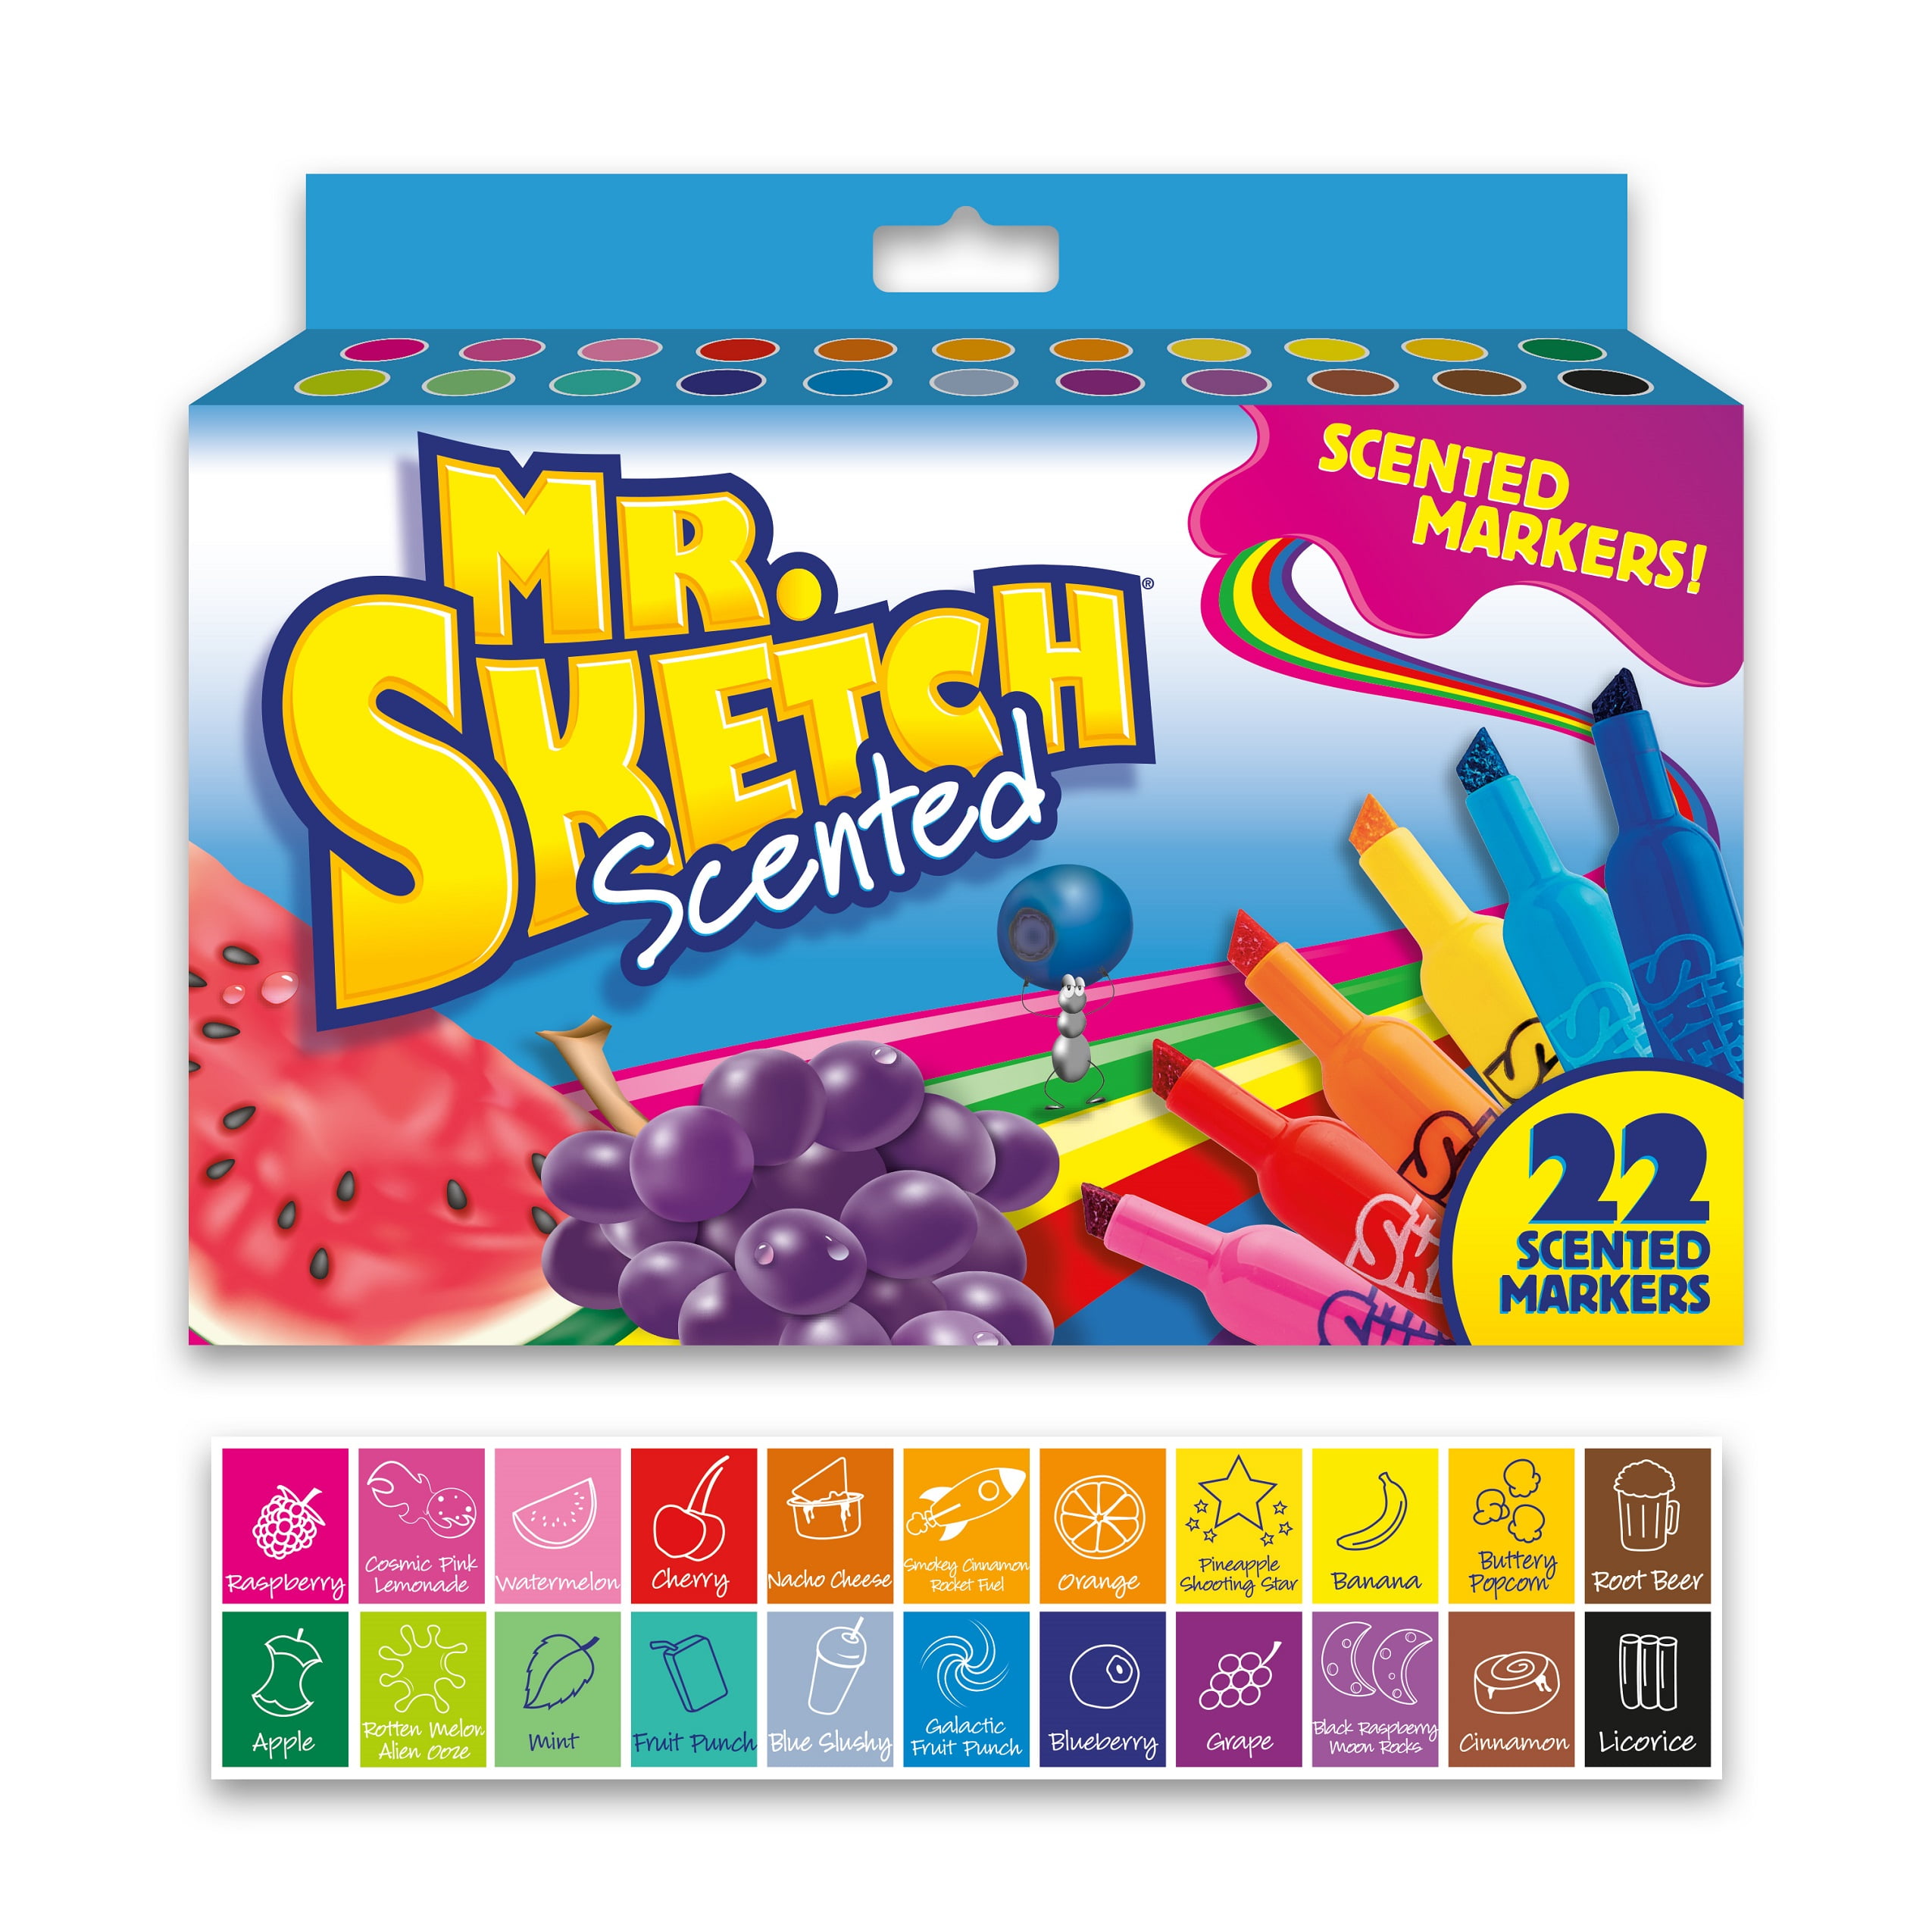 New Mr Sketch Scented Markers 10 Count Assorted Colors WORLDWIDE SHIPPING 